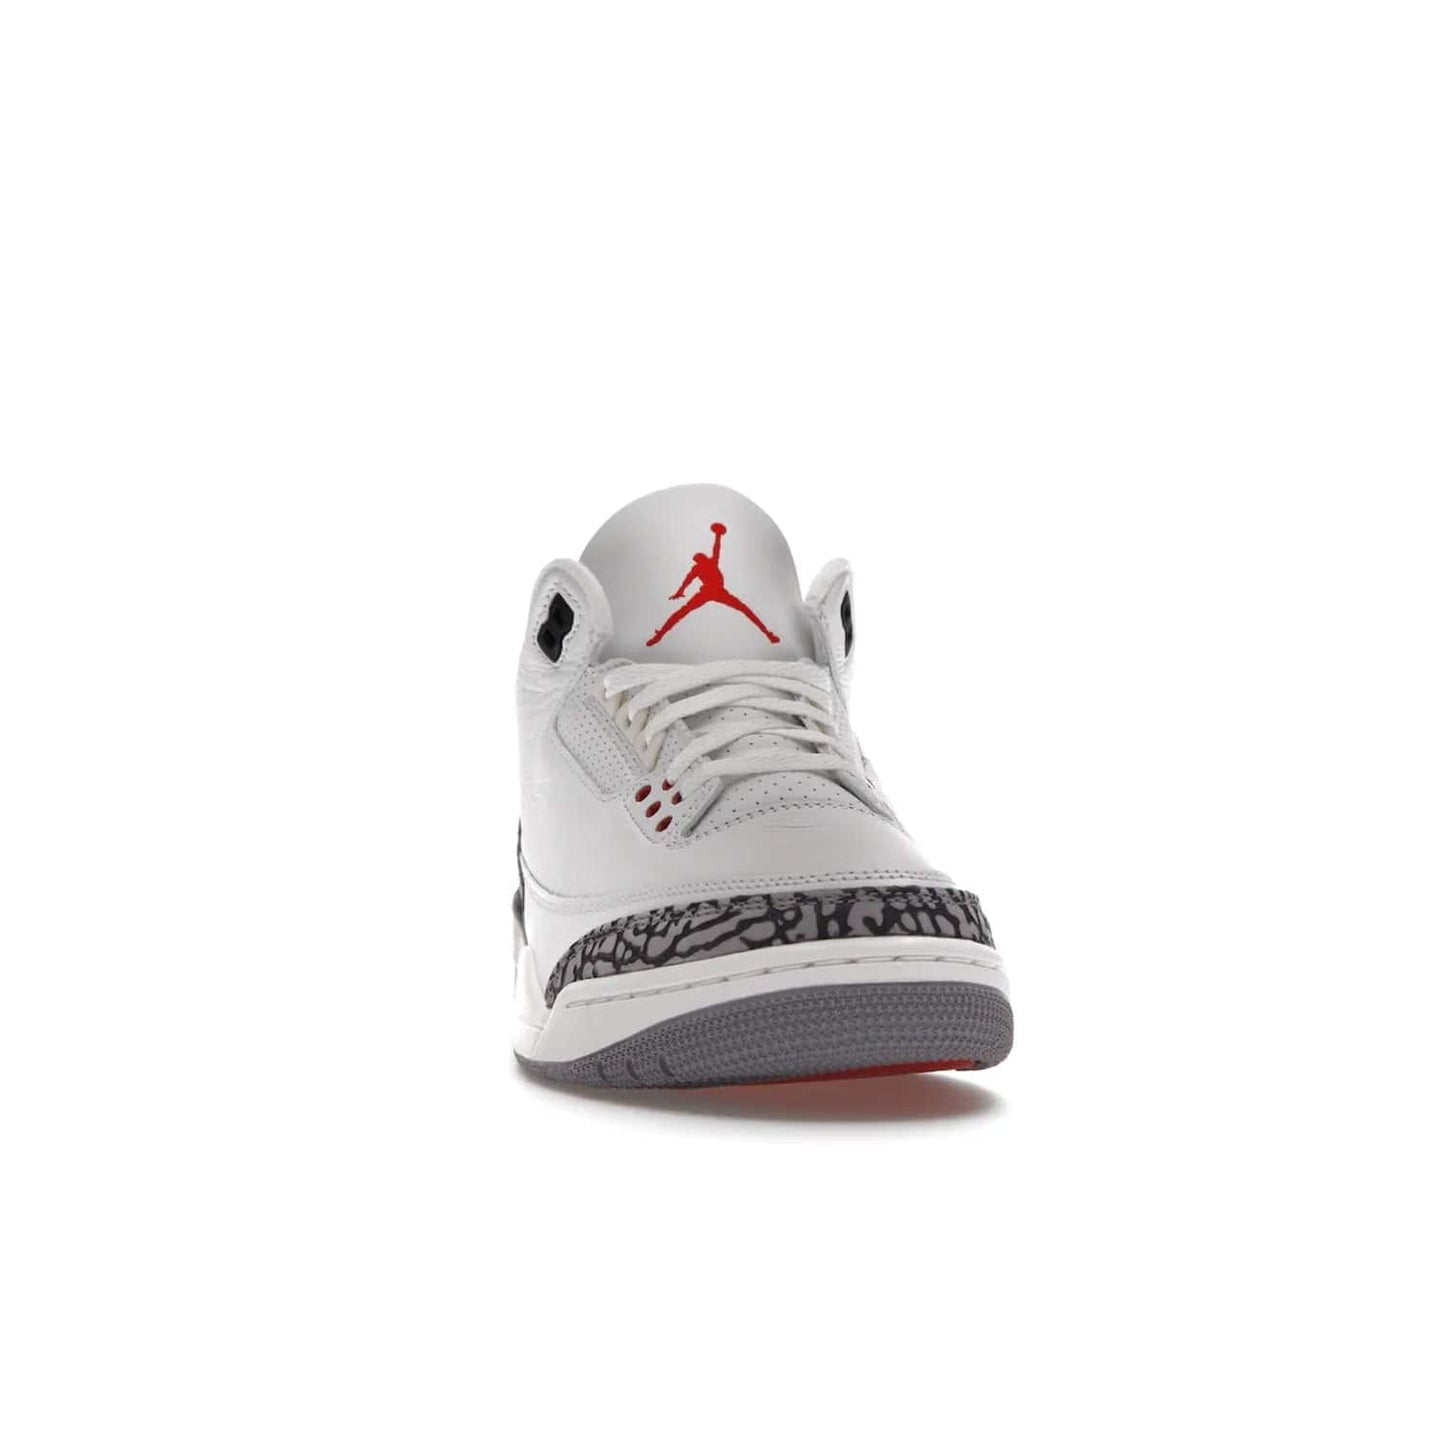 Jordan 3 Retro White Cement Reimagined - Image 9 - Only at www.BallersClubKickz.com - The Reimagined Air Jordan 3 Retro in a Summit White/Fire Red/Black/Cement Grey colorway is launching on March 11, 2023. Featuring a white leather upper, off-white midsoles and heel tabs, this vintage-look sneaker is a must-have.